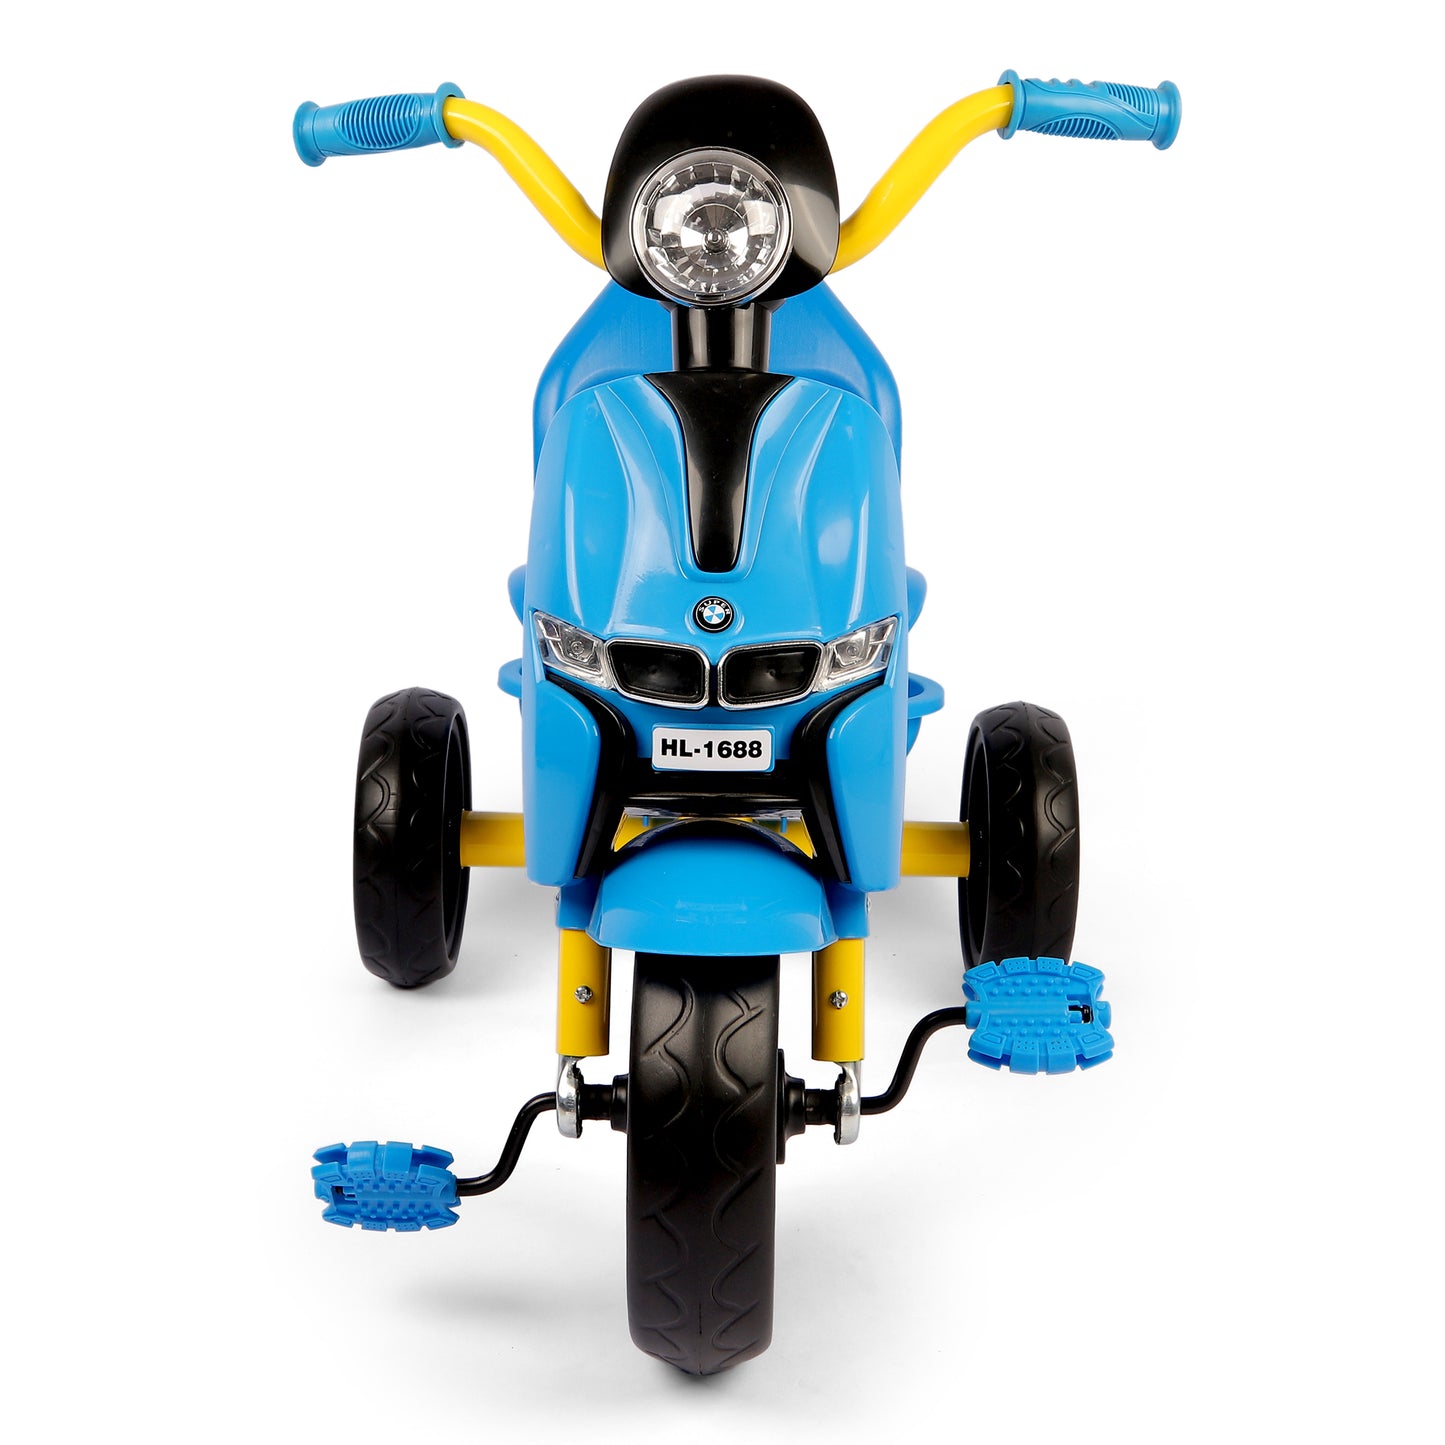 BMW Face Kids Tricycle